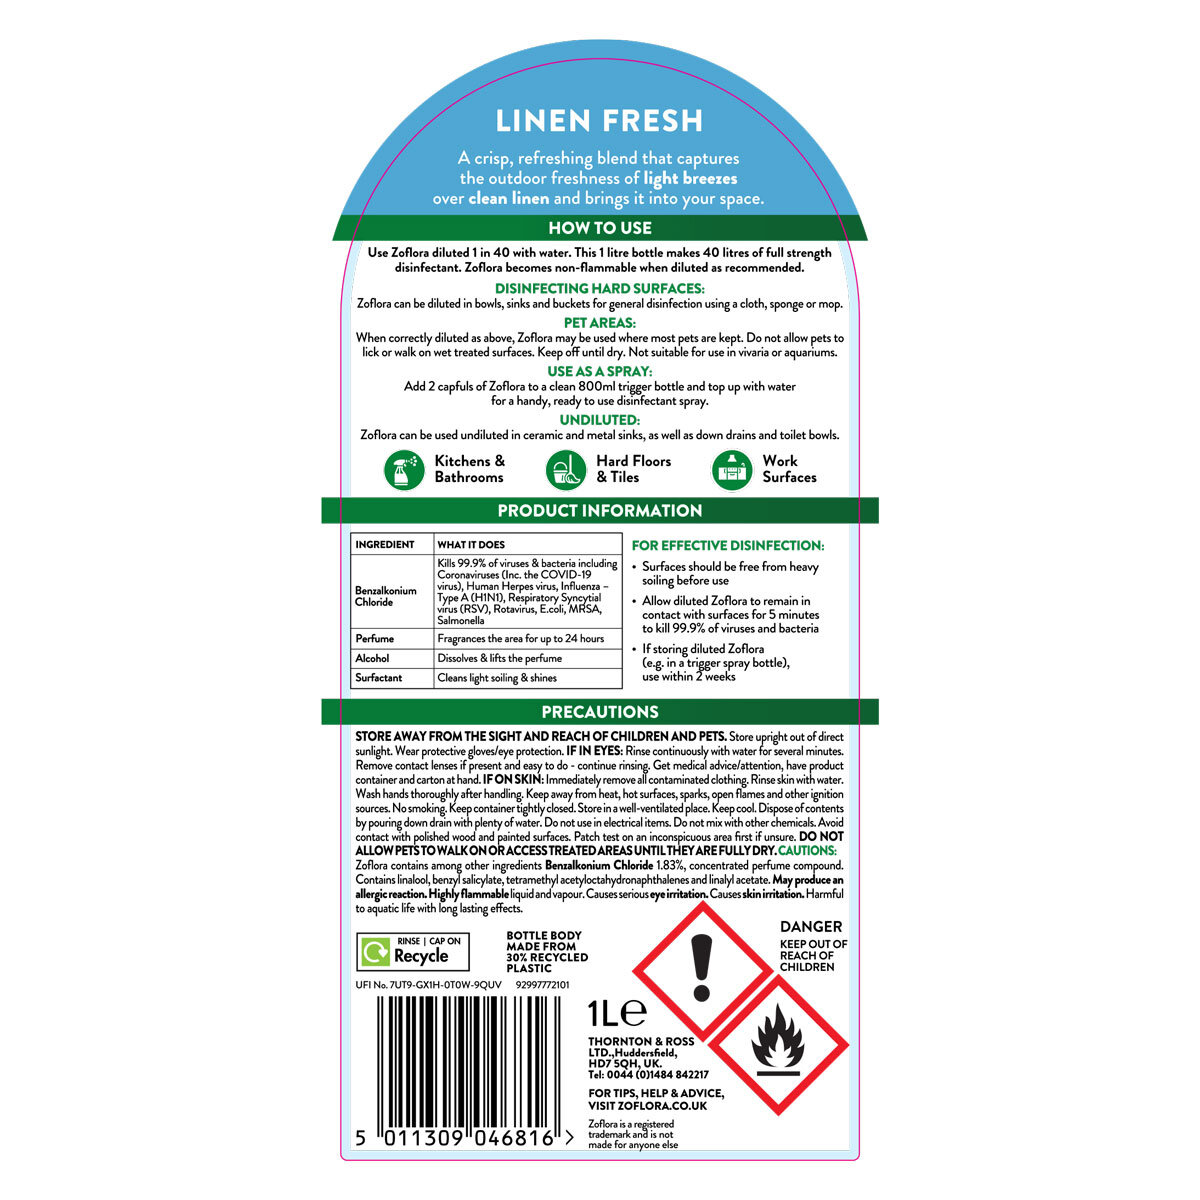 Zoflora Concentrated Disinfectant, 2 x 1L